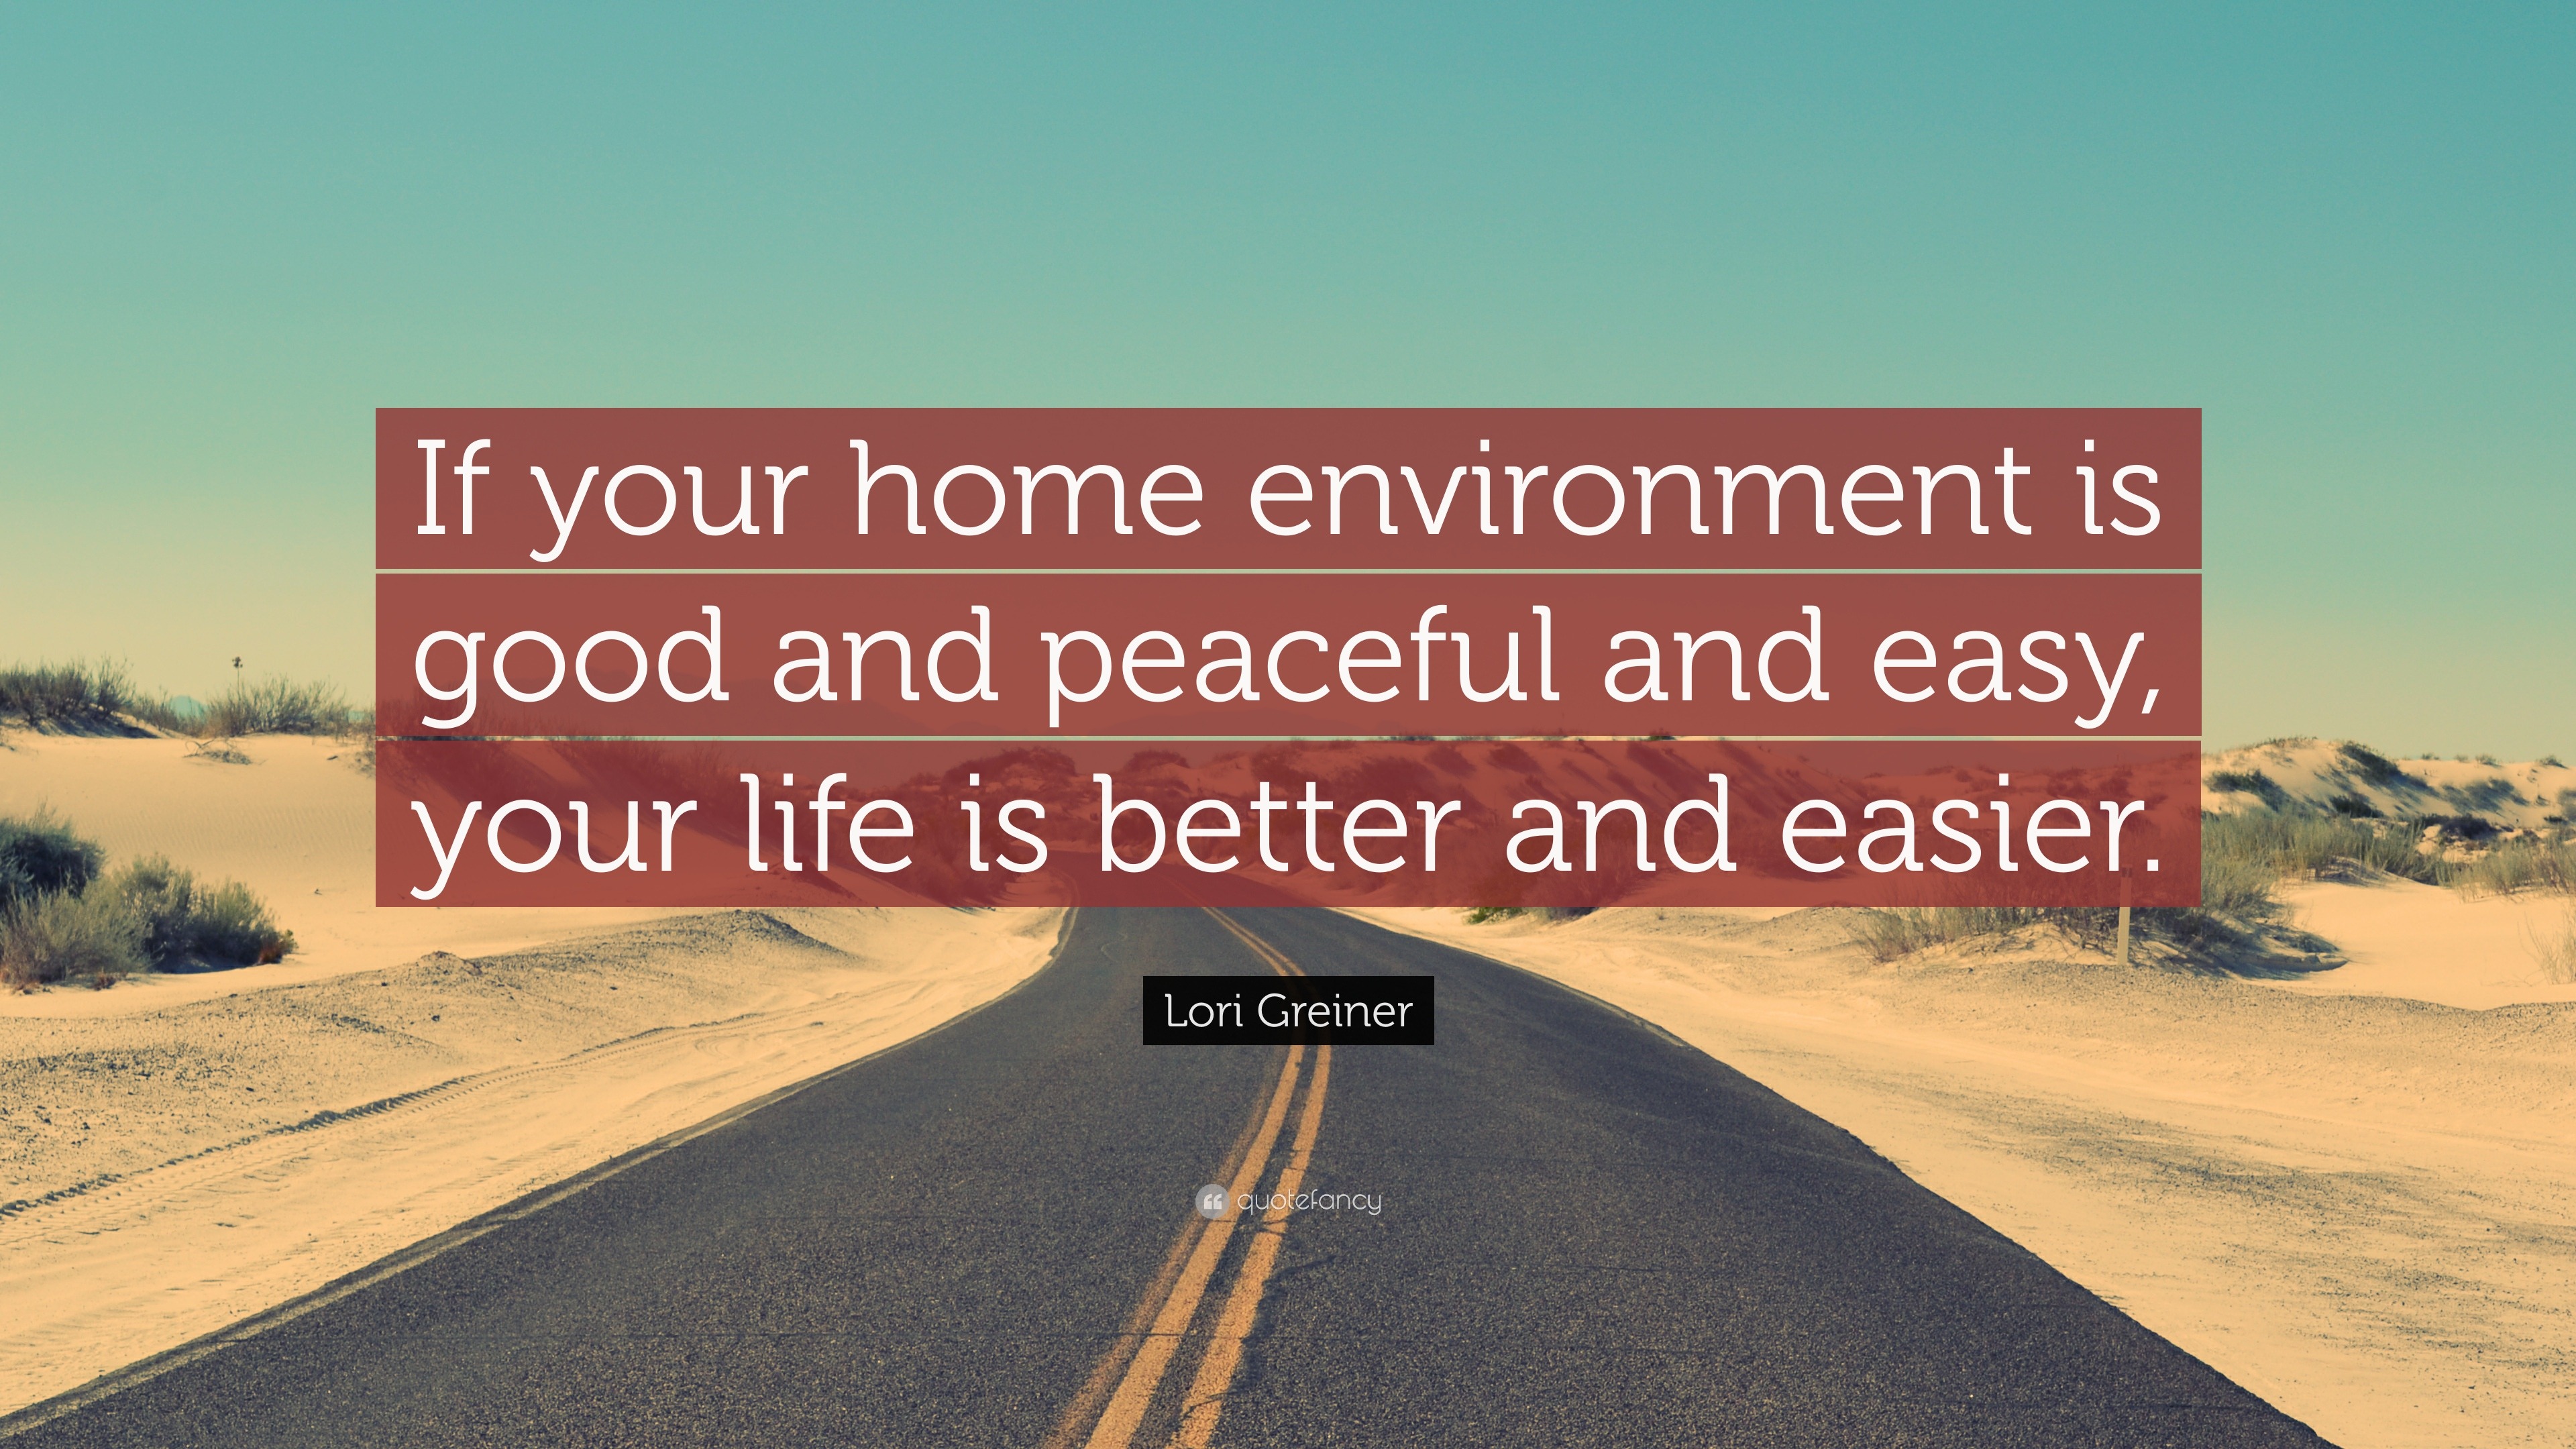 1959990 Lori Greiner Quote If your home environment is good and peaceful